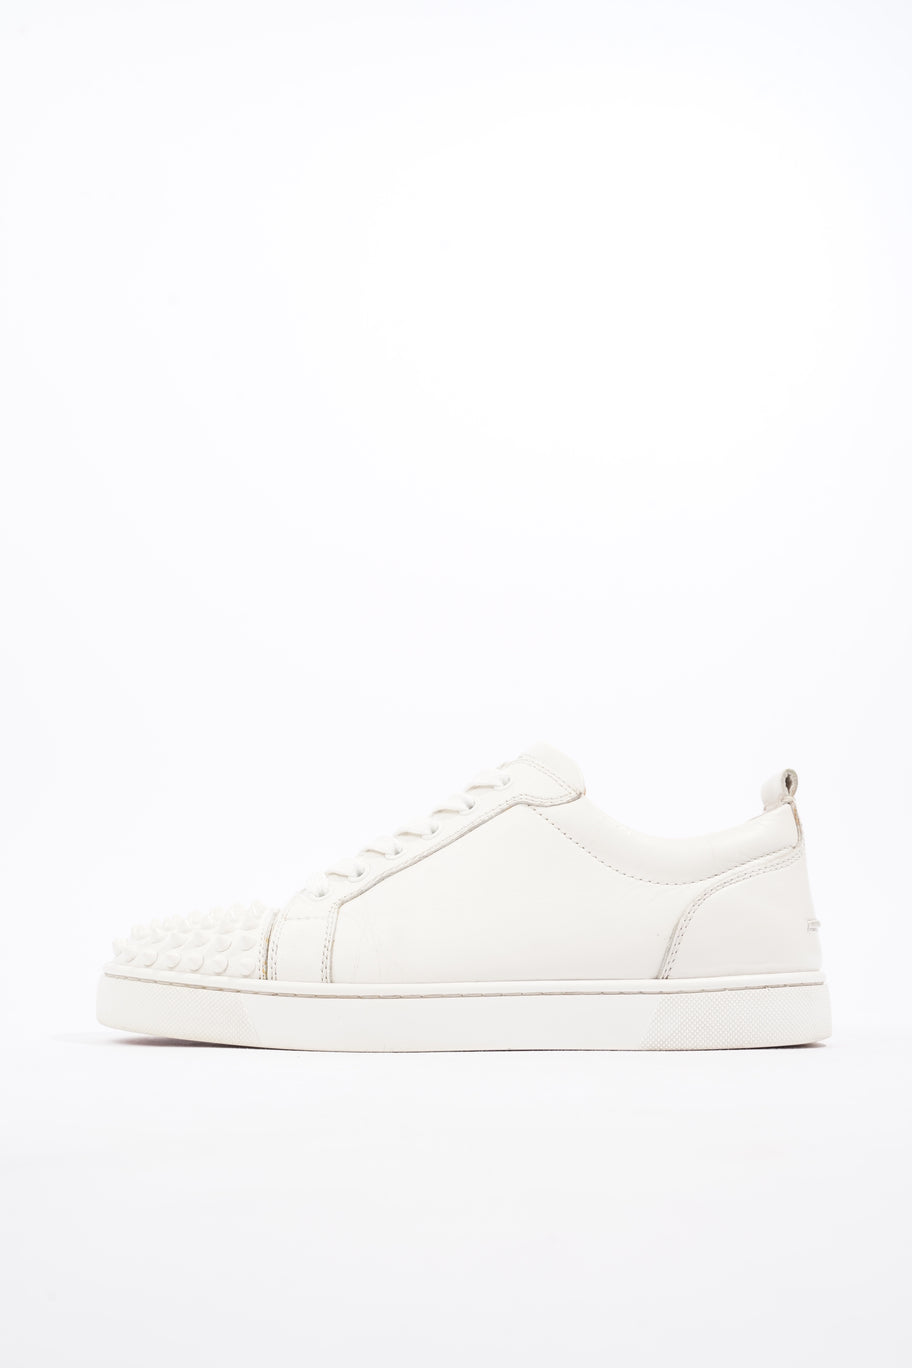 Louis Junior Spikes Sneakers White Leather EU 41 UK 7 Image 5